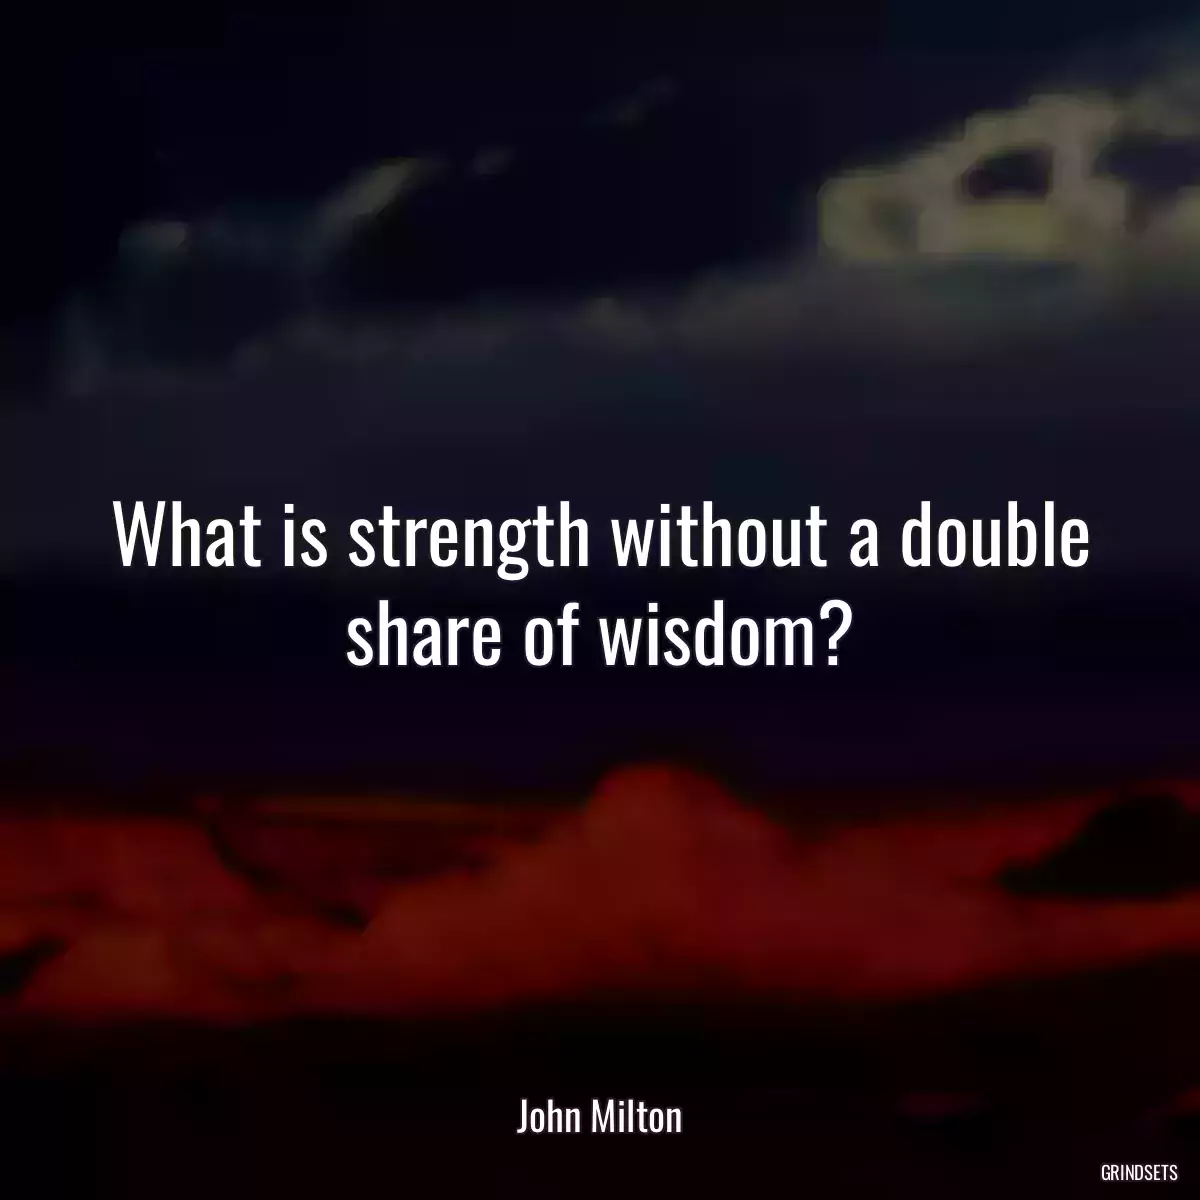 What is strength without a double share of wisdom?